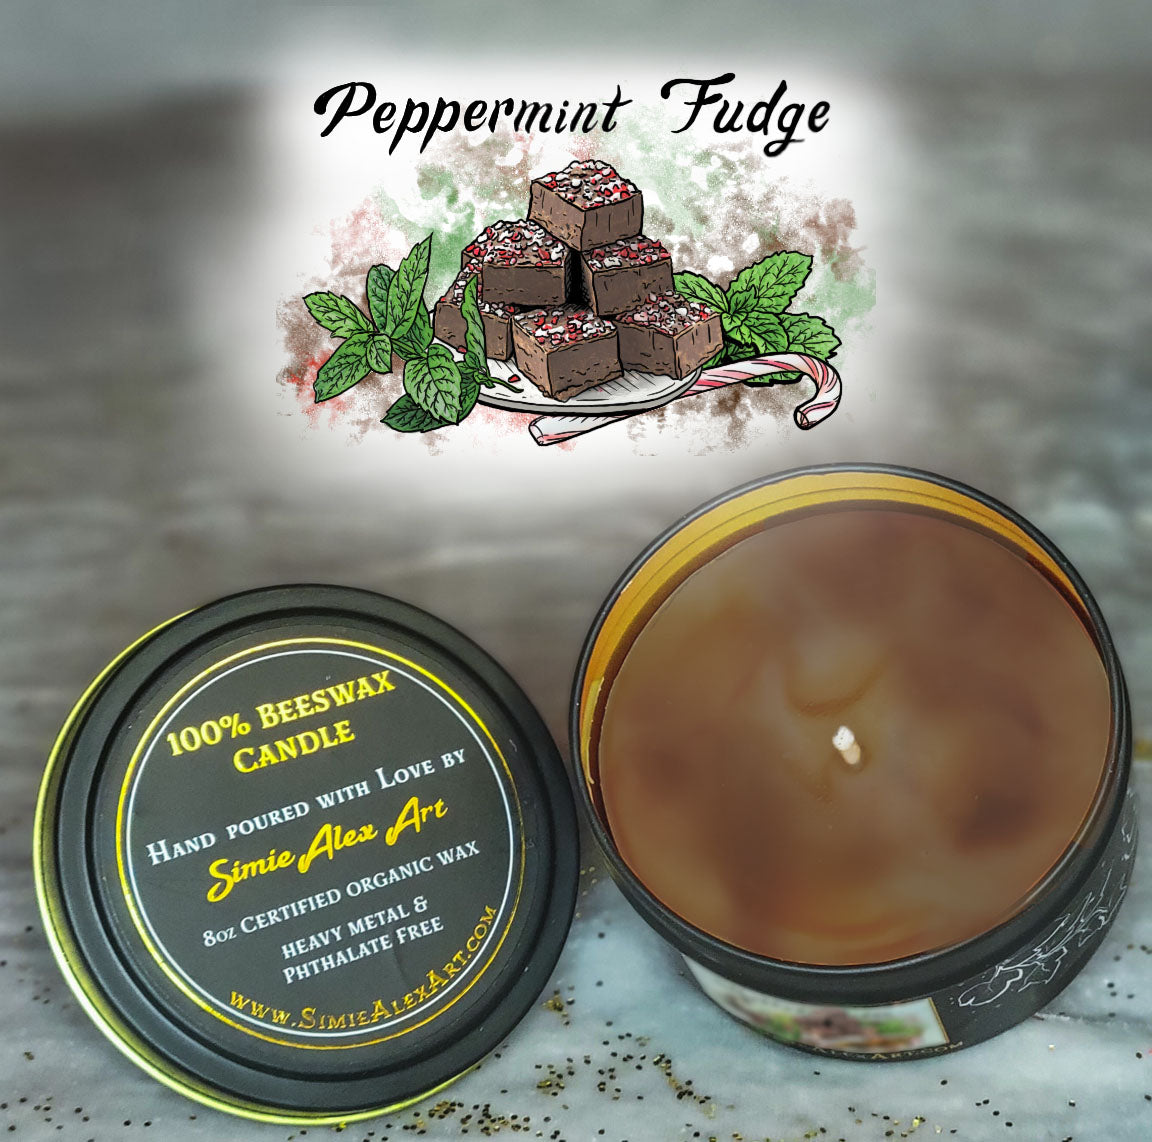 Peppermint Fudge Beeswax Candle